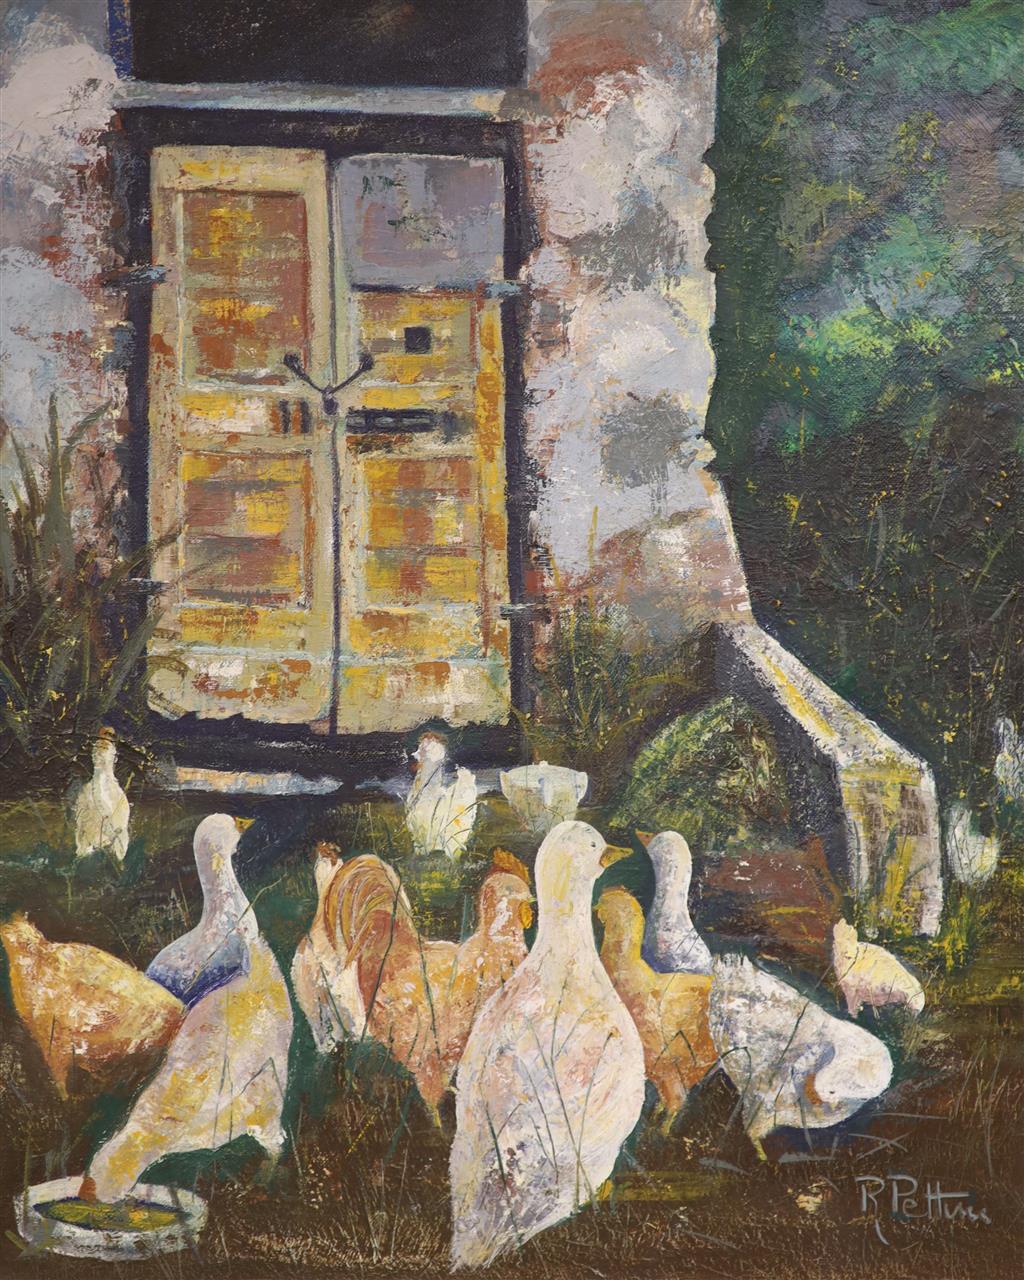 R. Pettini, oil on canvas, Poultry beside a church door, signed, 59 x 49cm